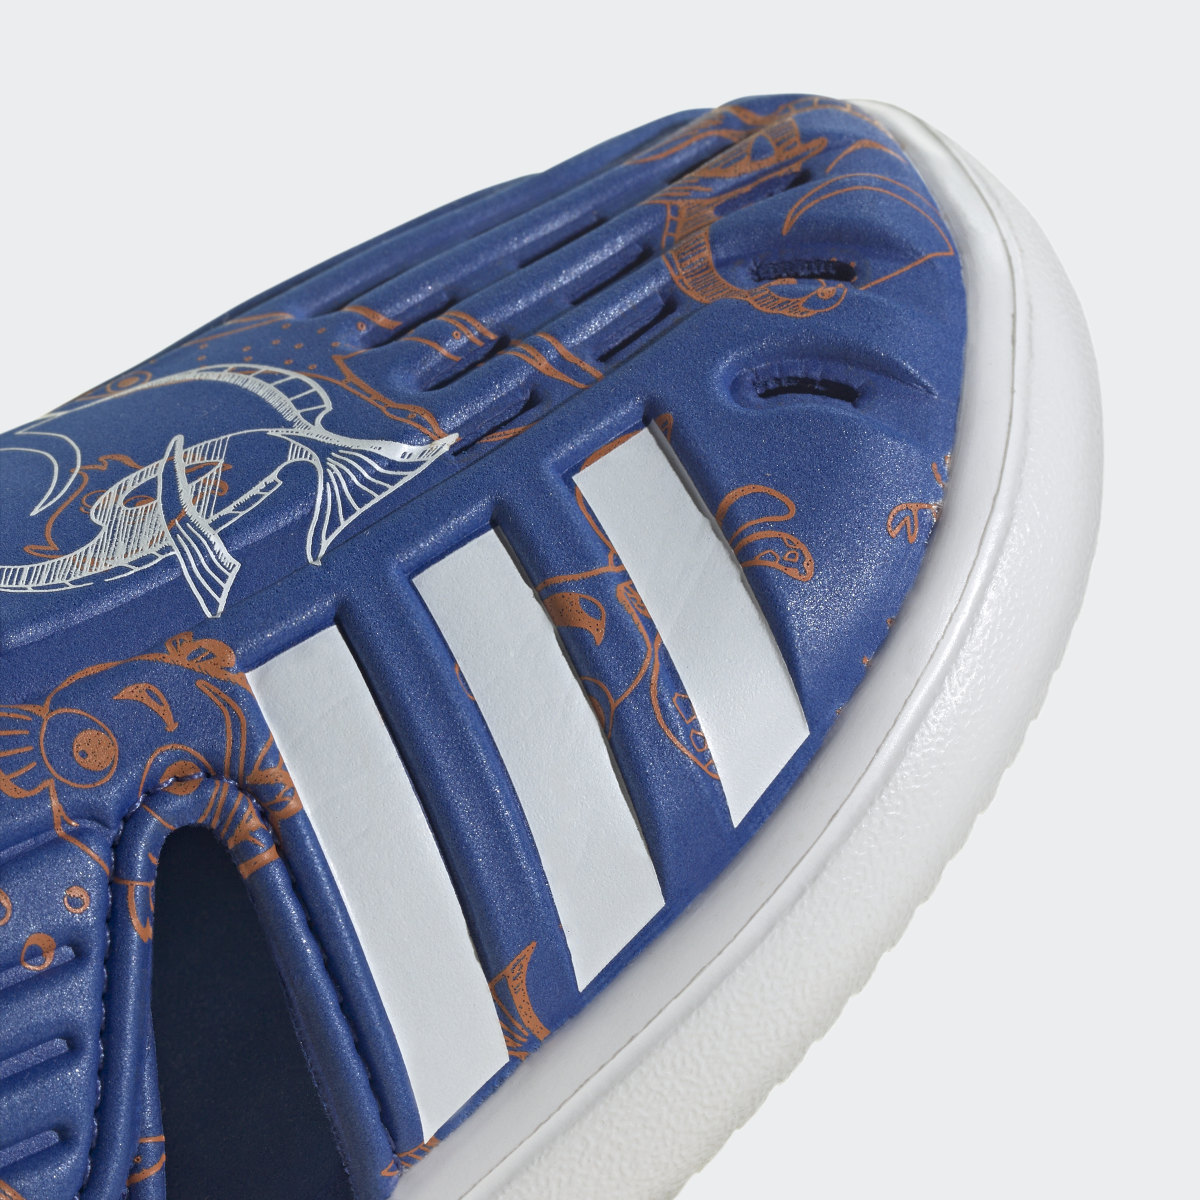 Adidas Finding Nemo and Dory Closed Toe Summer Water Sandals. 9